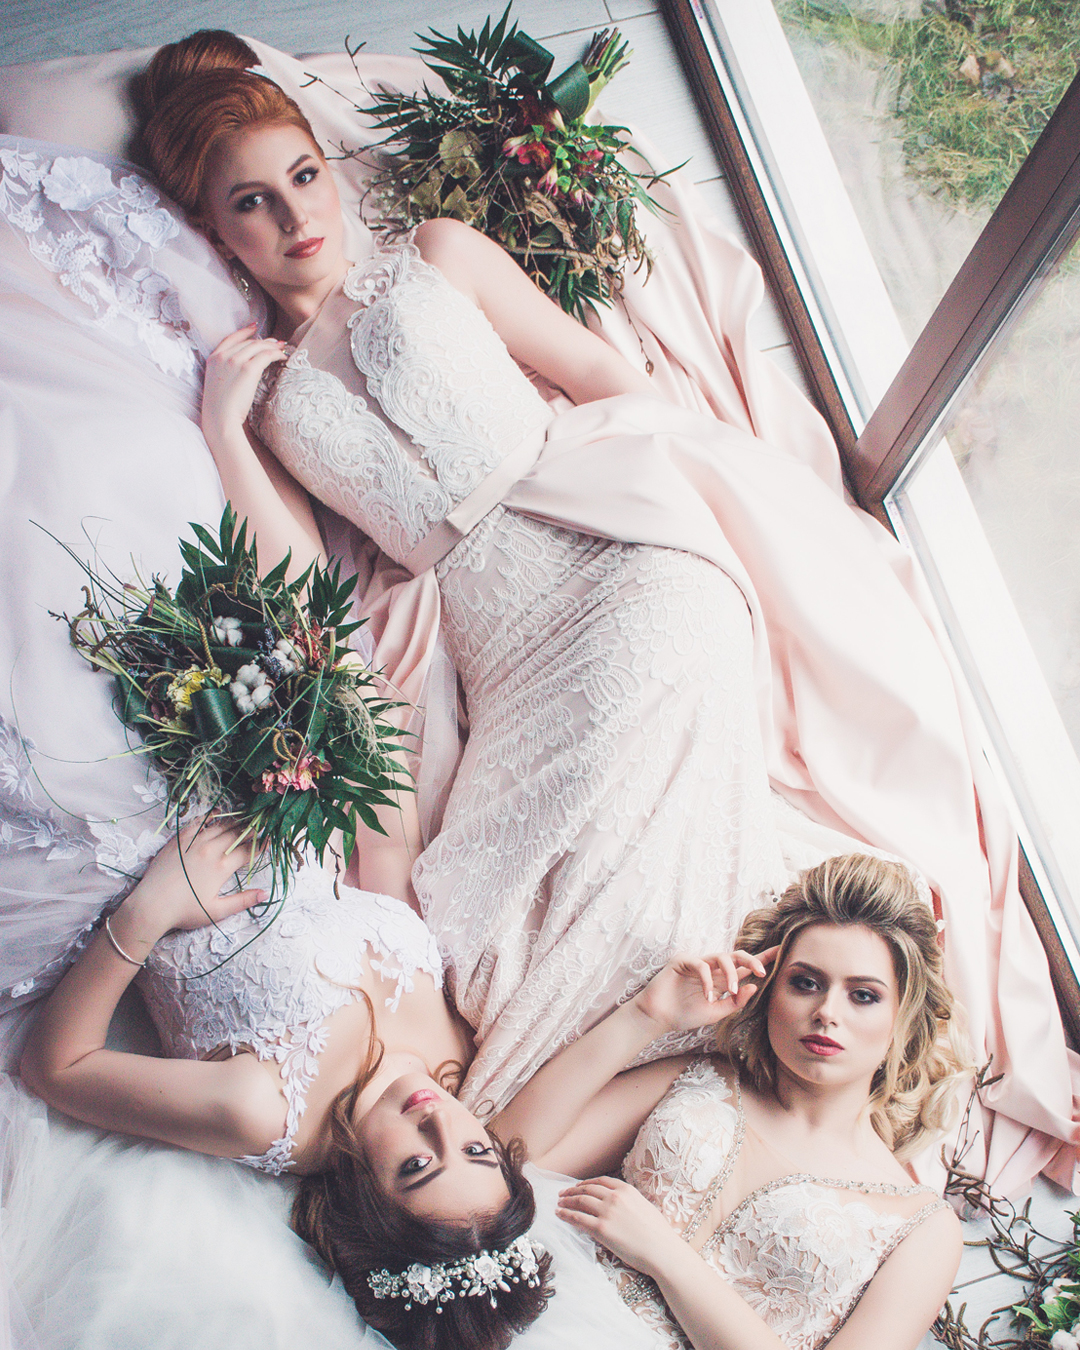 Three brides laying down next to each other in white wedding dresses and bouqet of flowers.